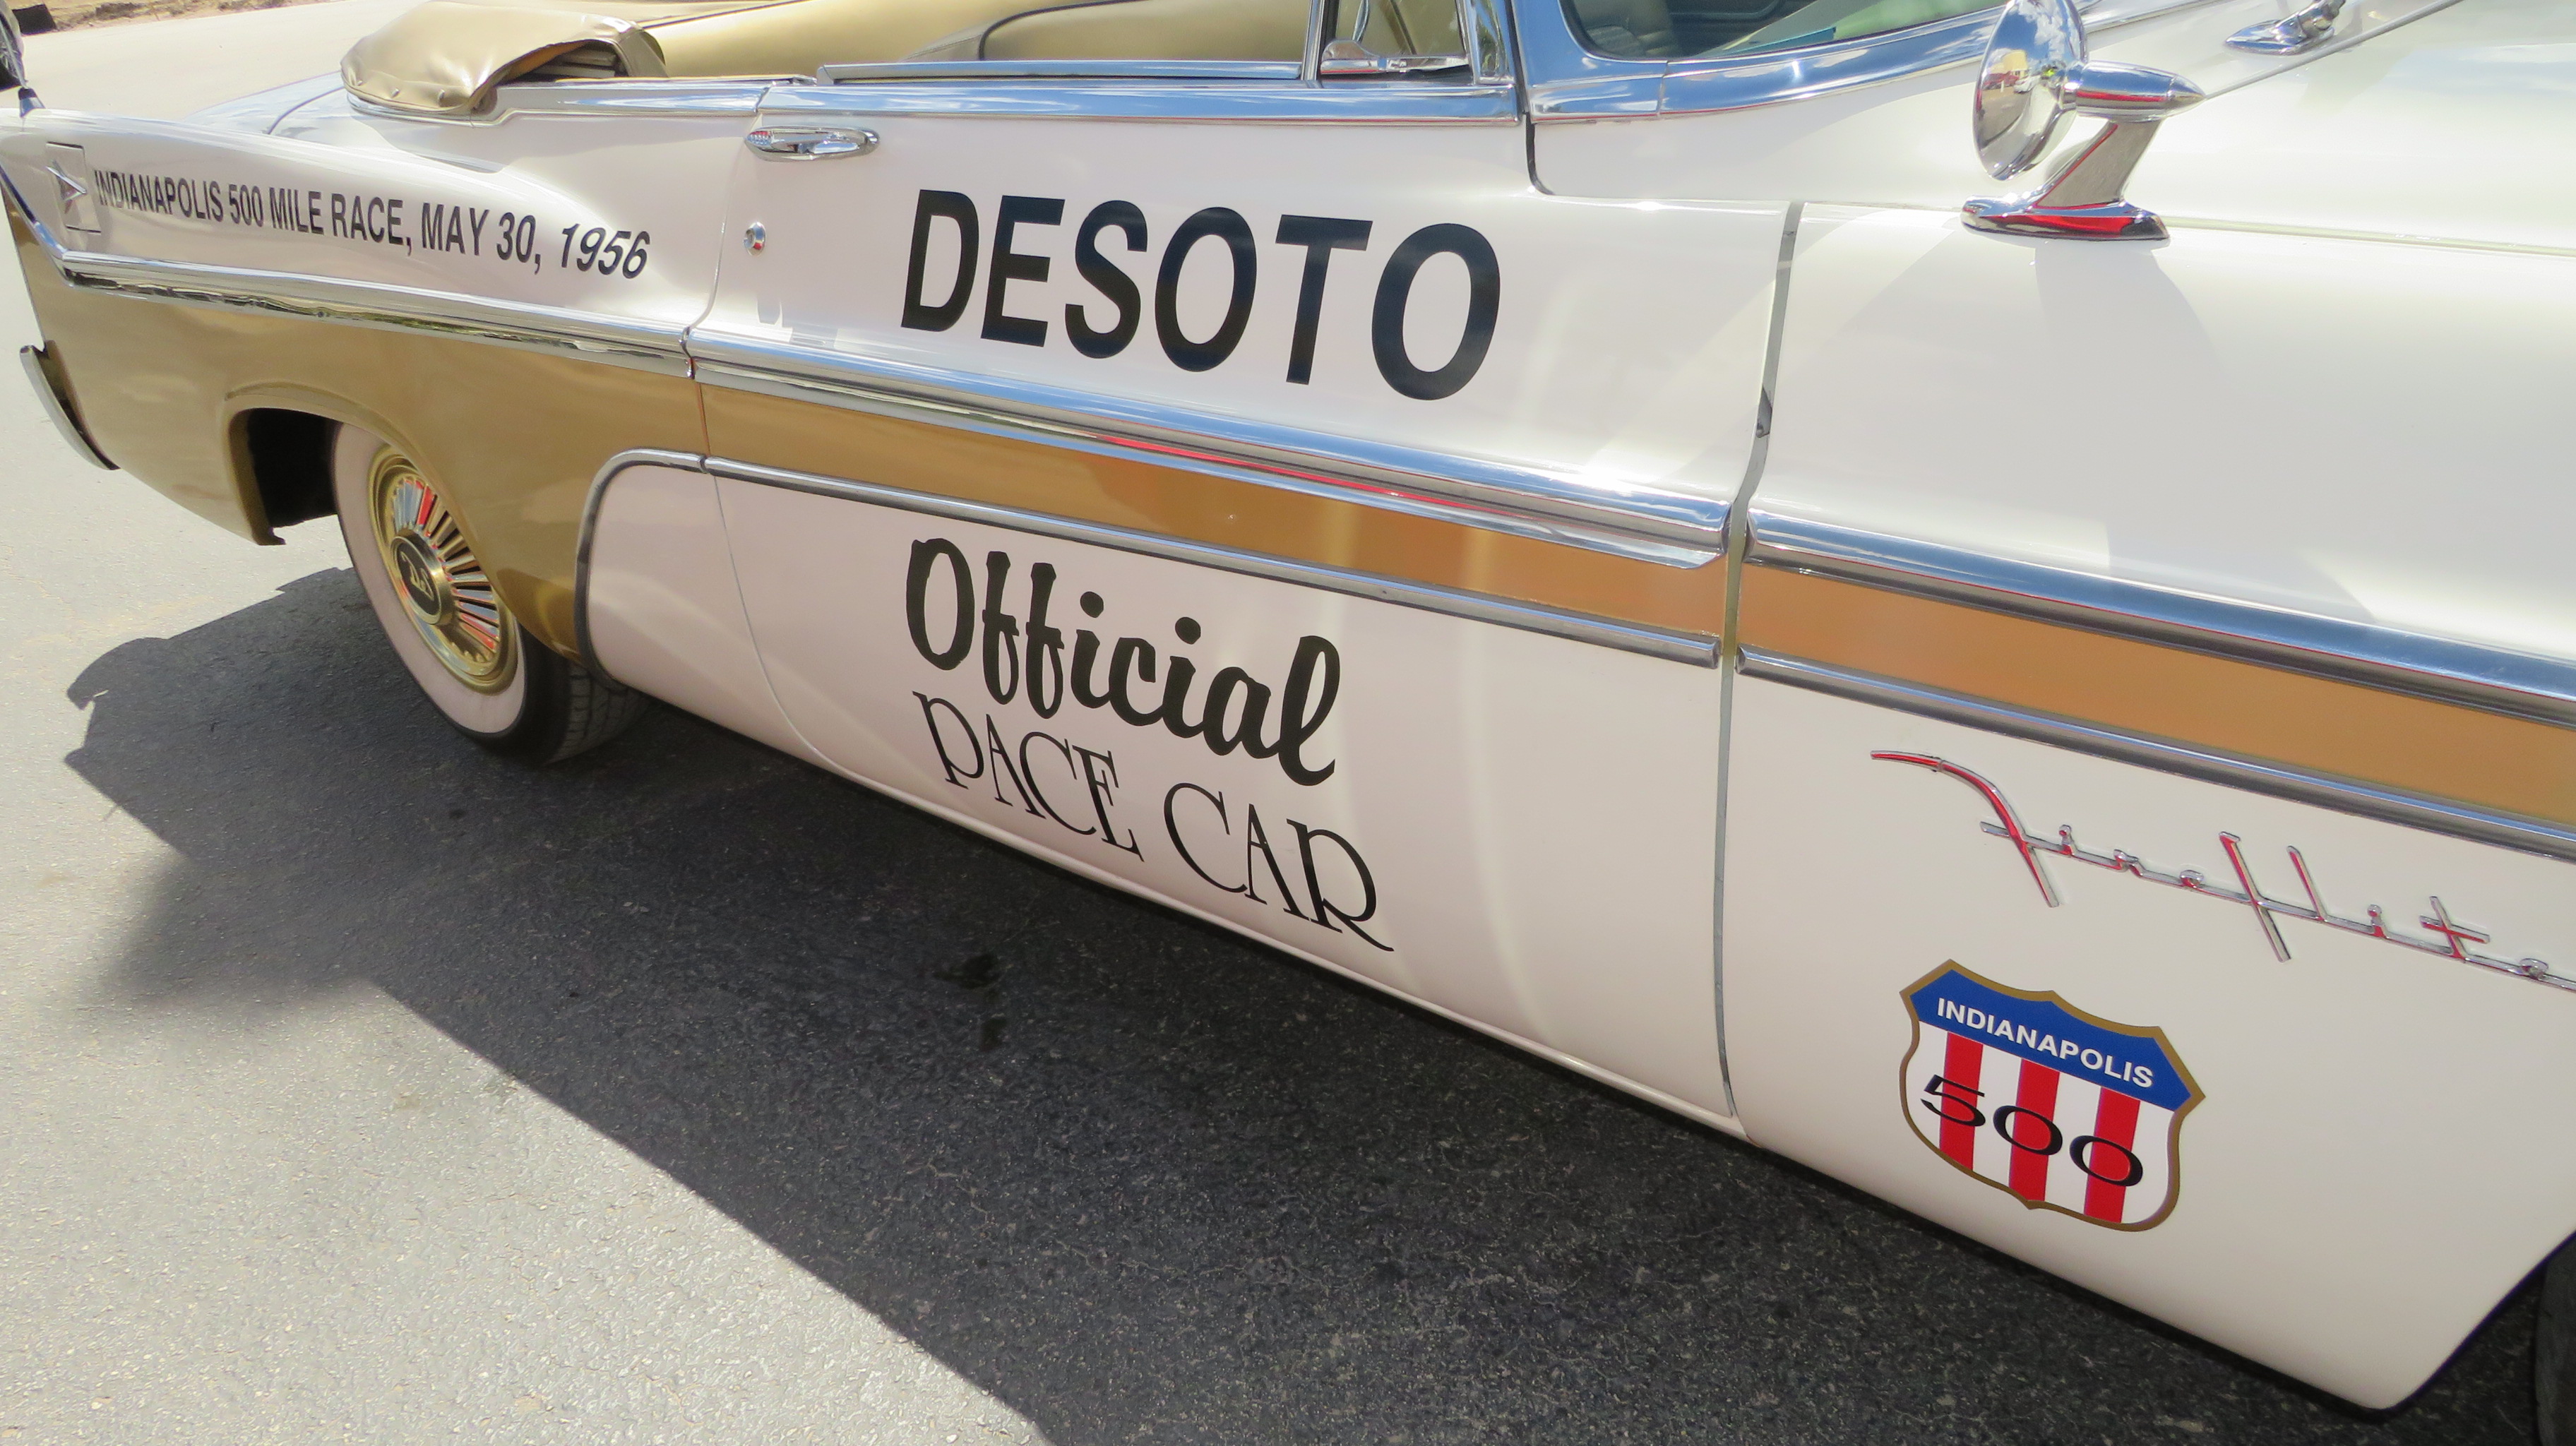 9th Image of a 1956 DESOTO PACE CAR